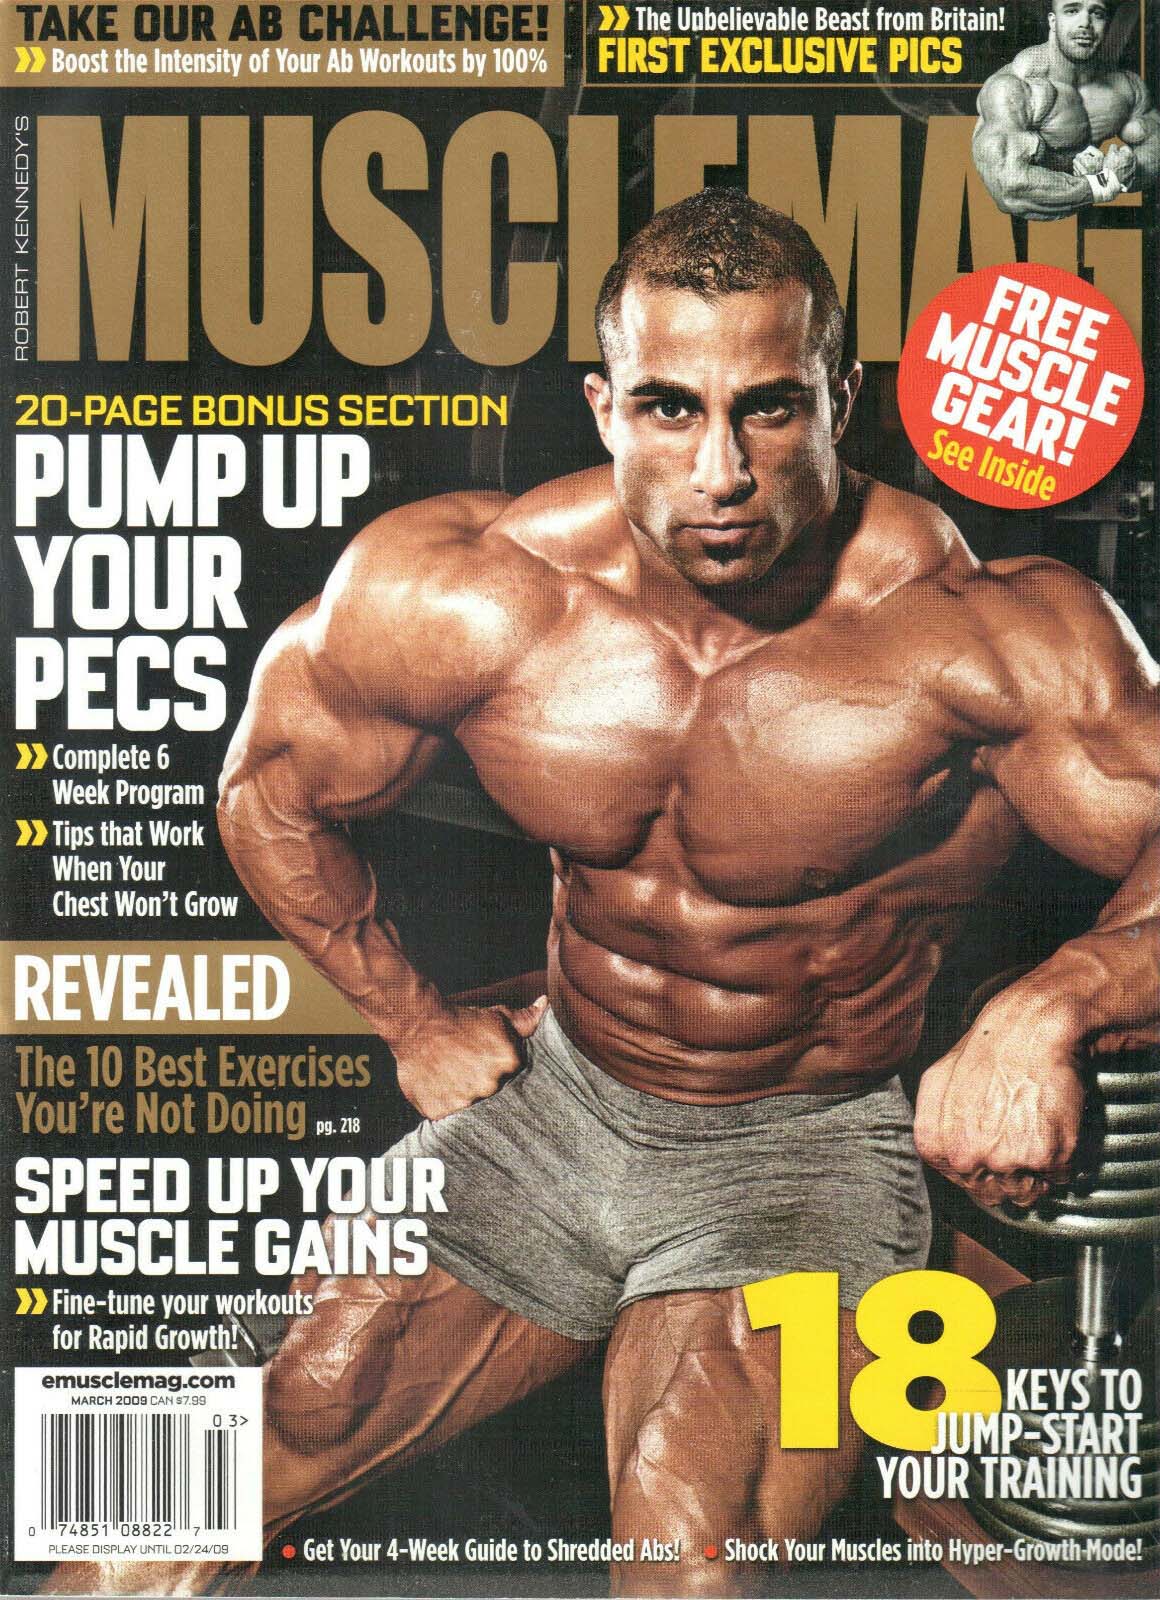 Muscle Mag March 2009 magazine back issue Muscle Mag magizine back copy Muscle Mag March 2009 Bodybuilding and Fitness Magazine Back Issue Published by Canadian Robert Kennedy and Founded in 1974. Take Our AB Challenge! Boost The Intensity Of Your Ab Workouts By 100%.